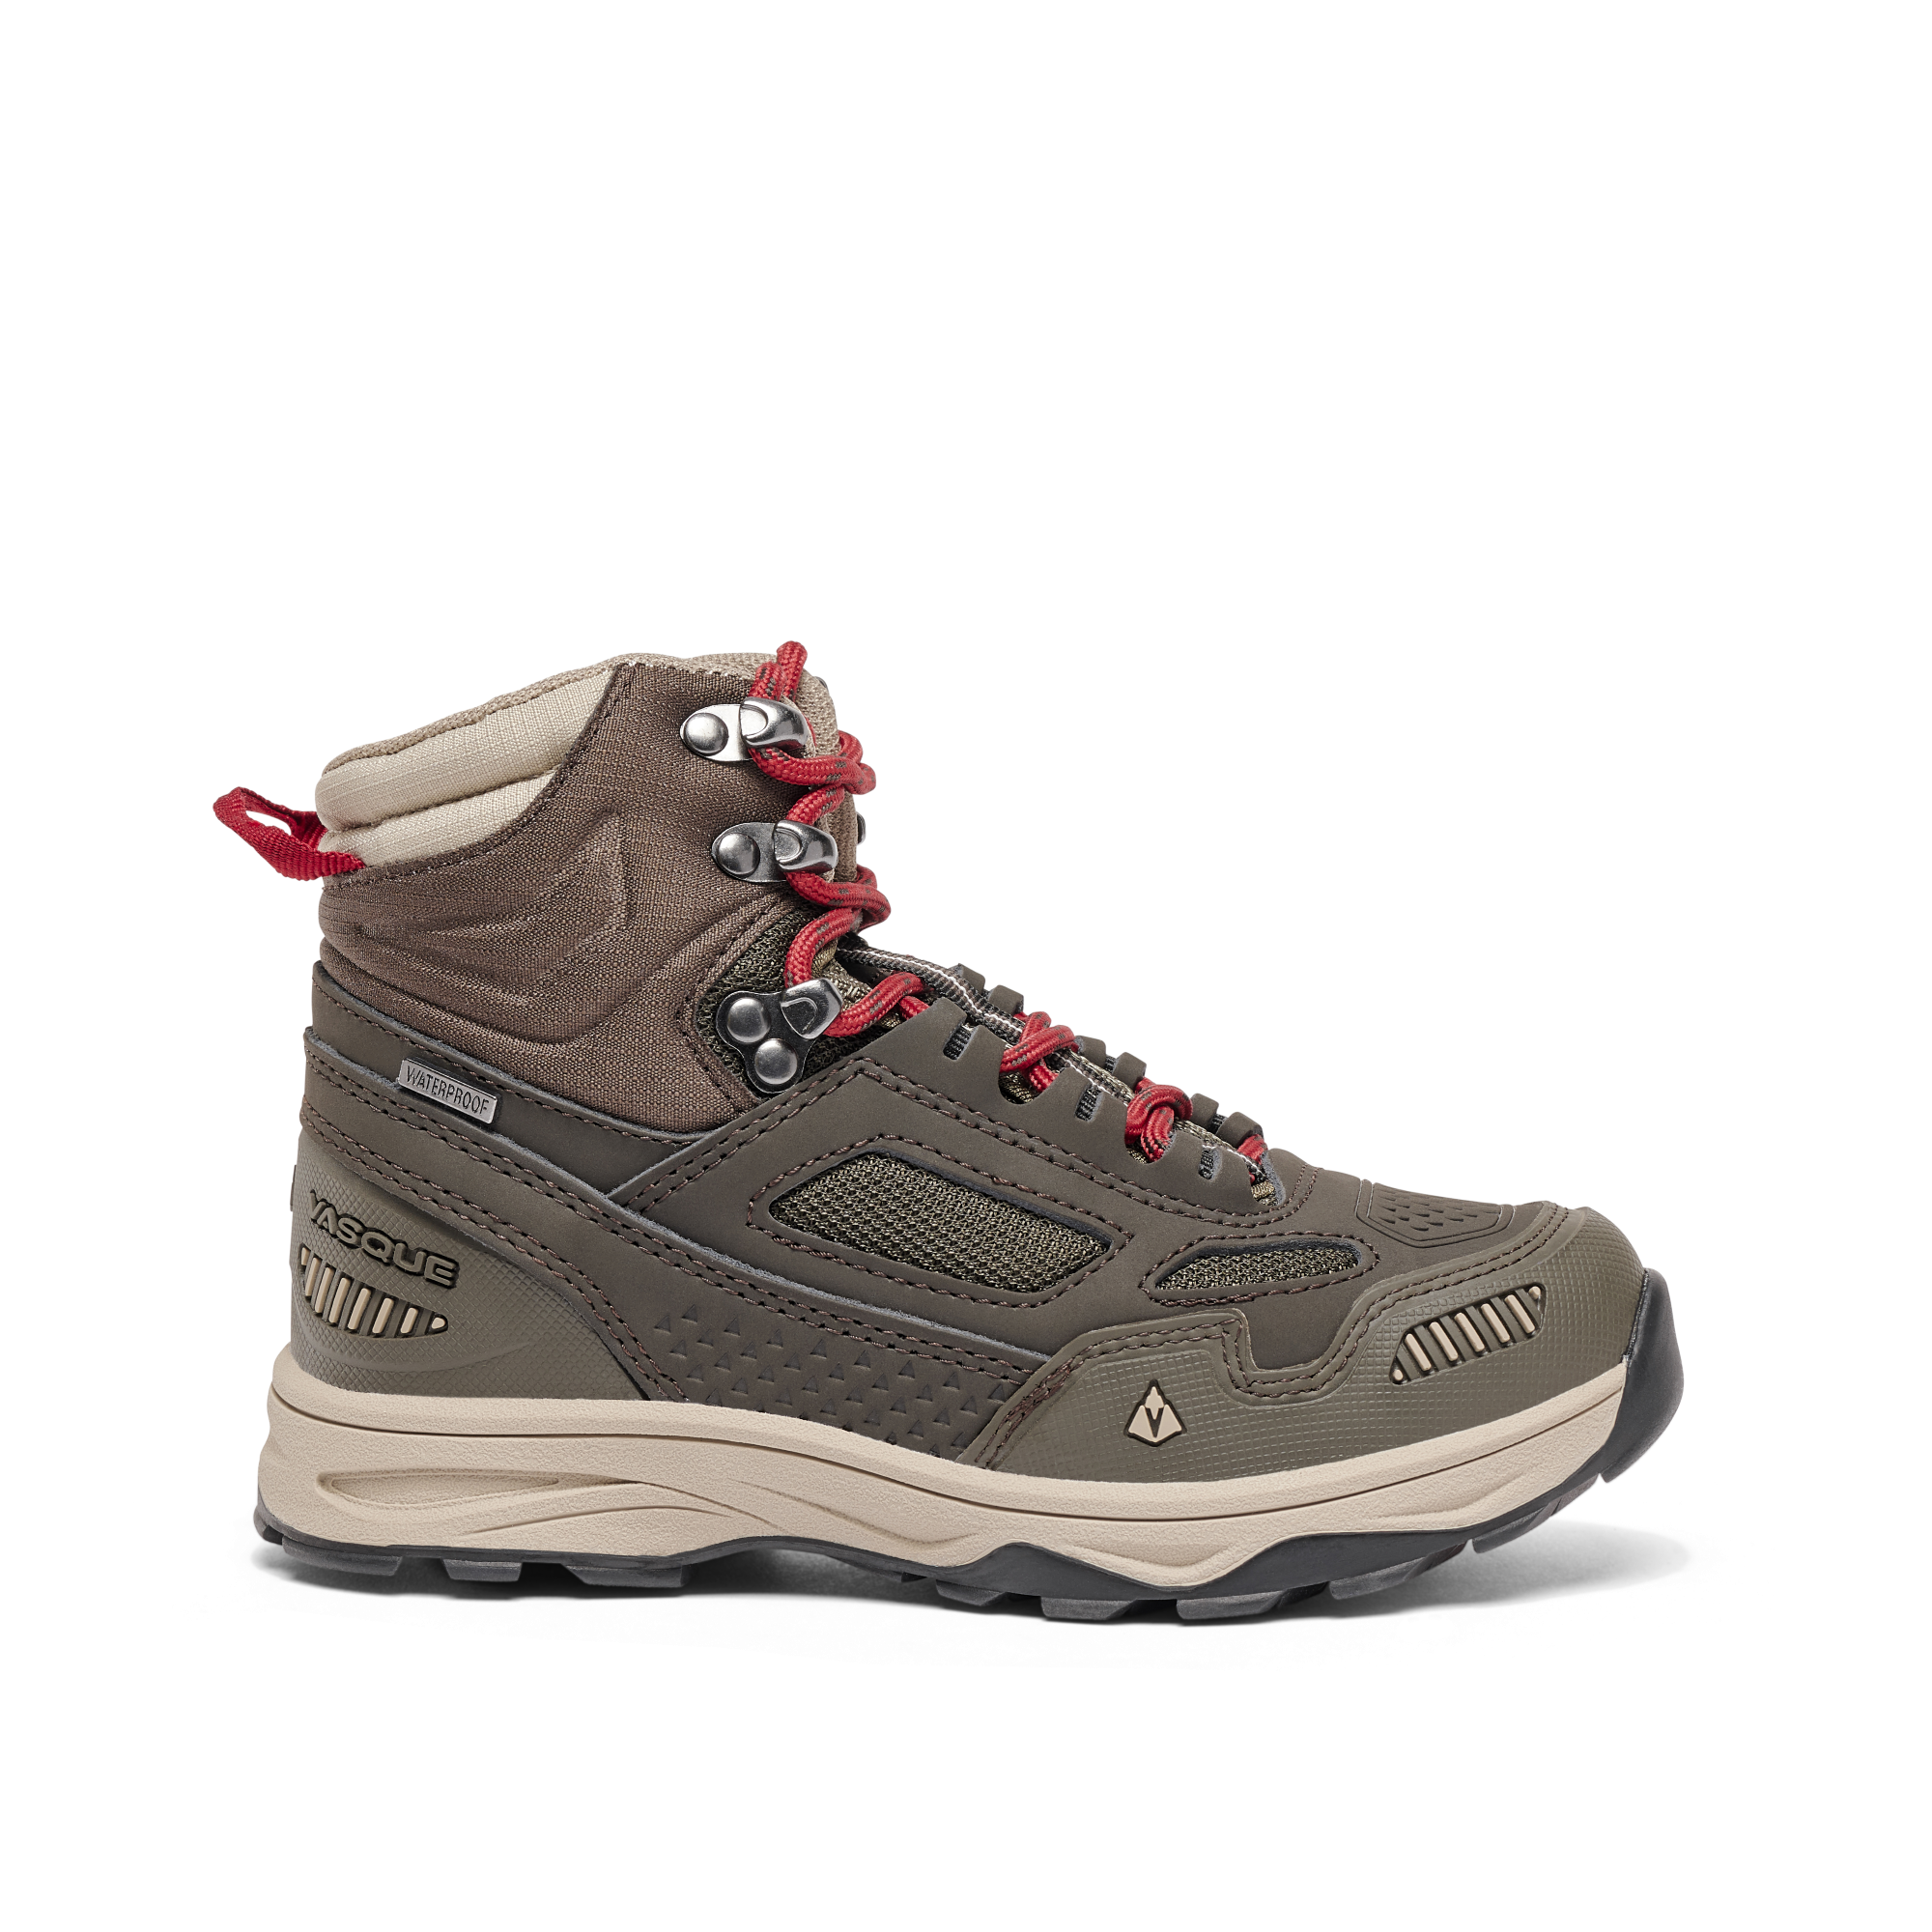 Vasque Breeze AT UltraDry Waterproof Hiking Boots for Kids - Olive - 5 Kids